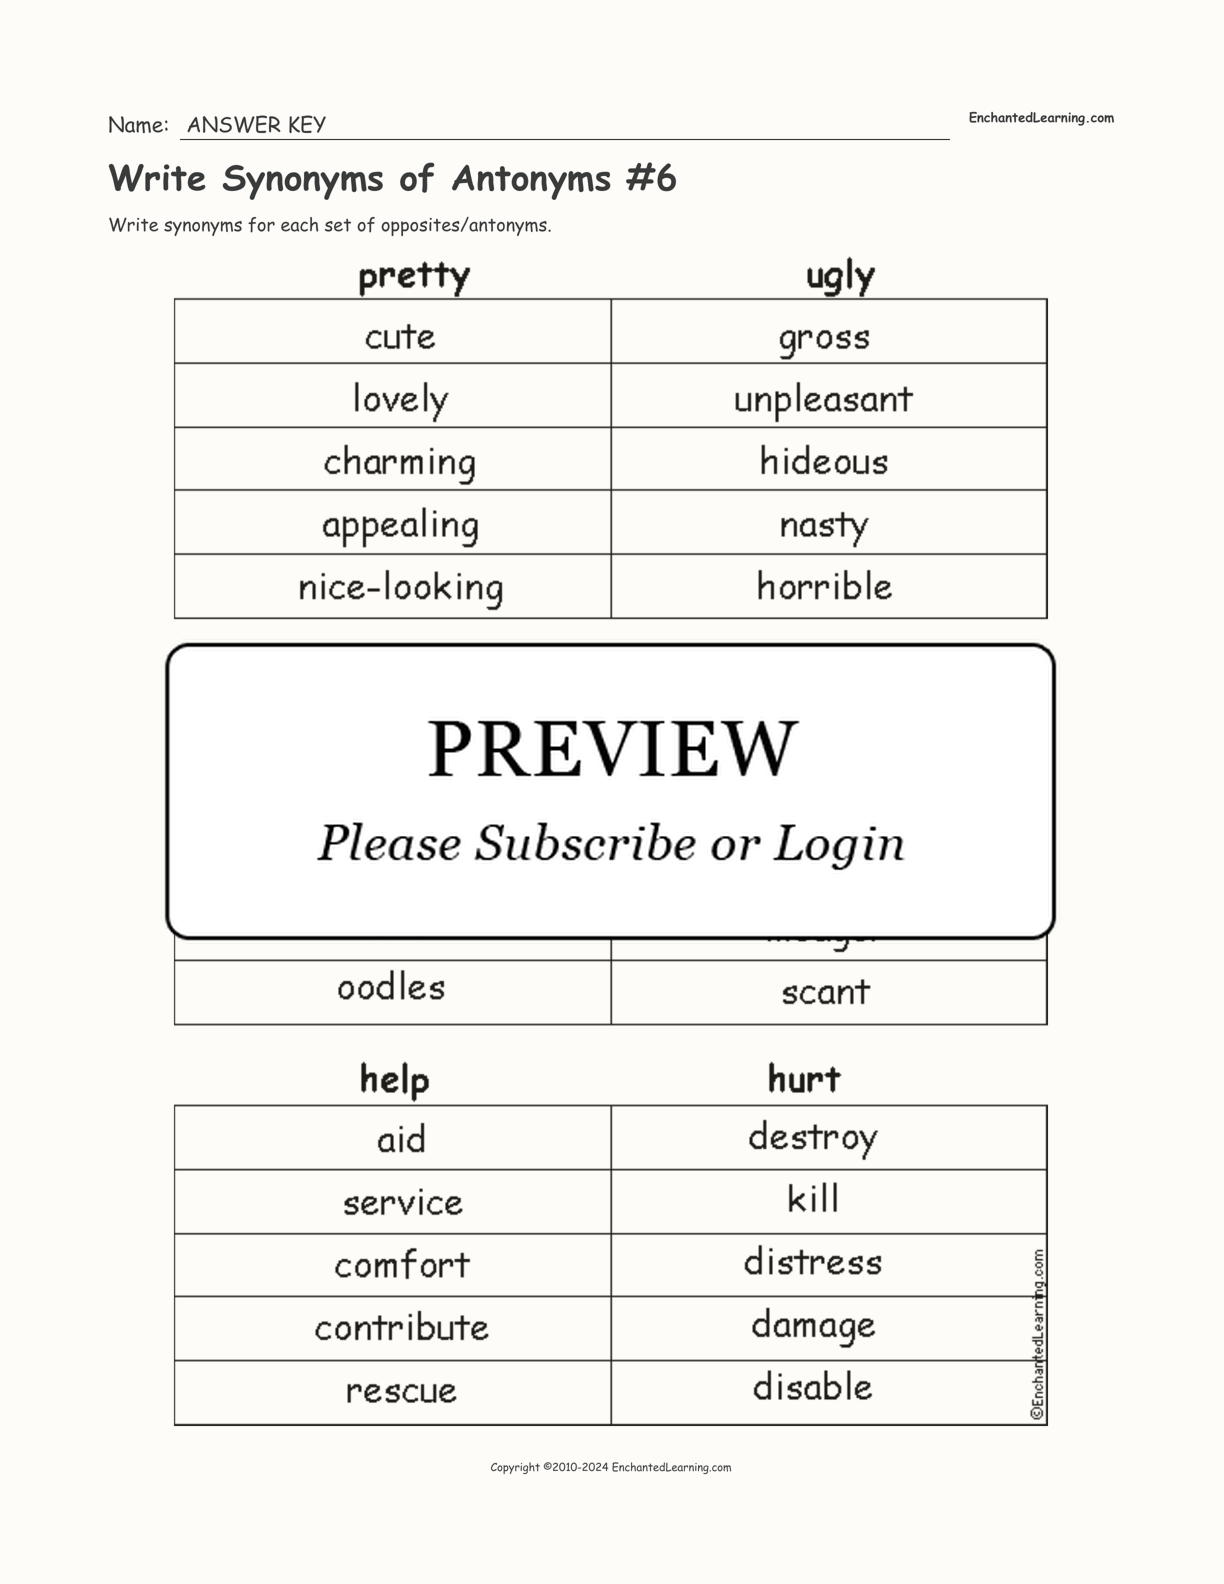 Write Synonyms of Antonyms #6 interactive worksheet page 2